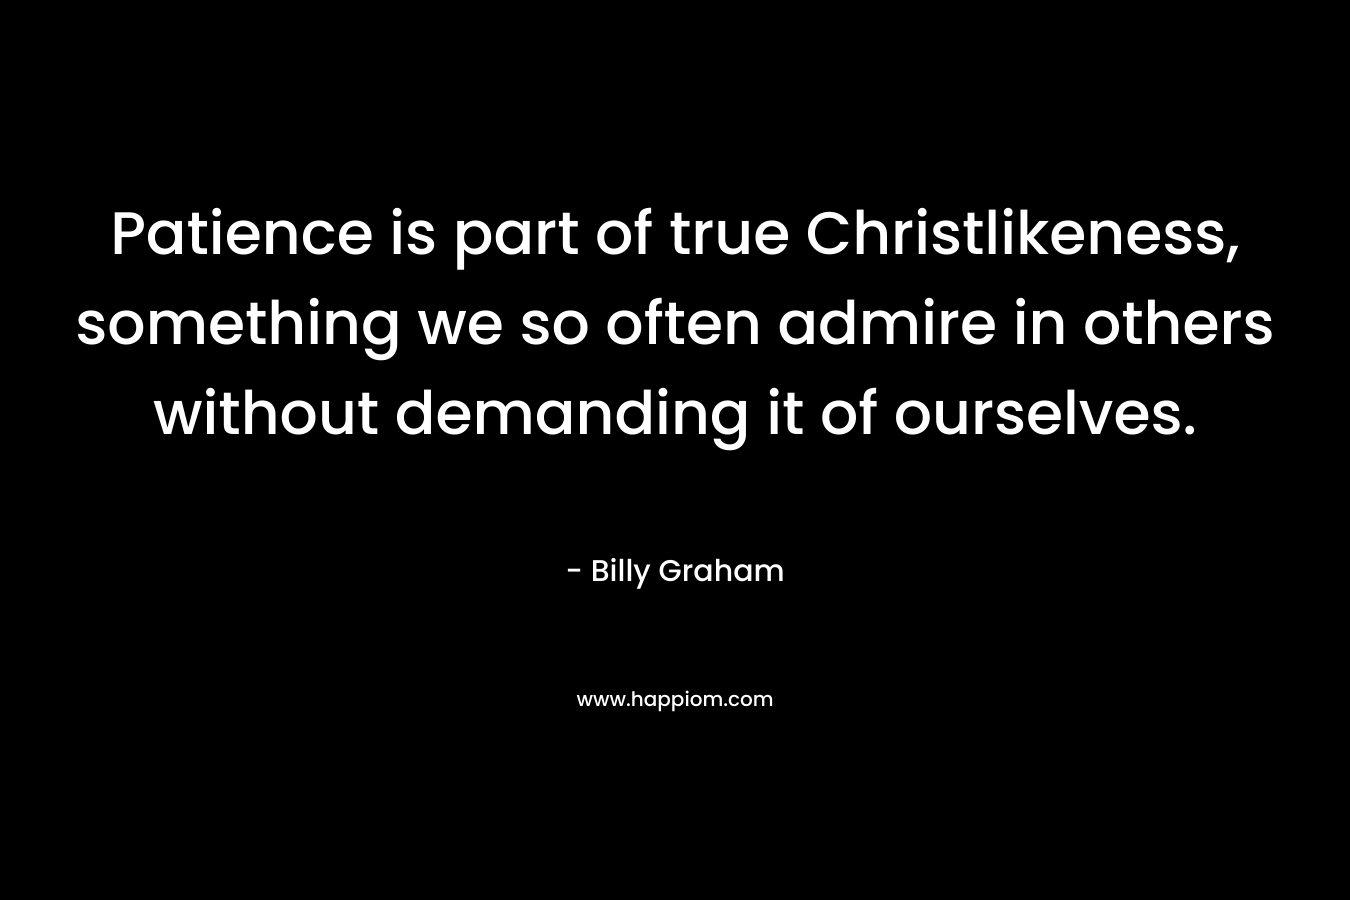 Patience is part of true Christlikeness, something we so often admire in others without demanding it of ourselves. – Billy Graham